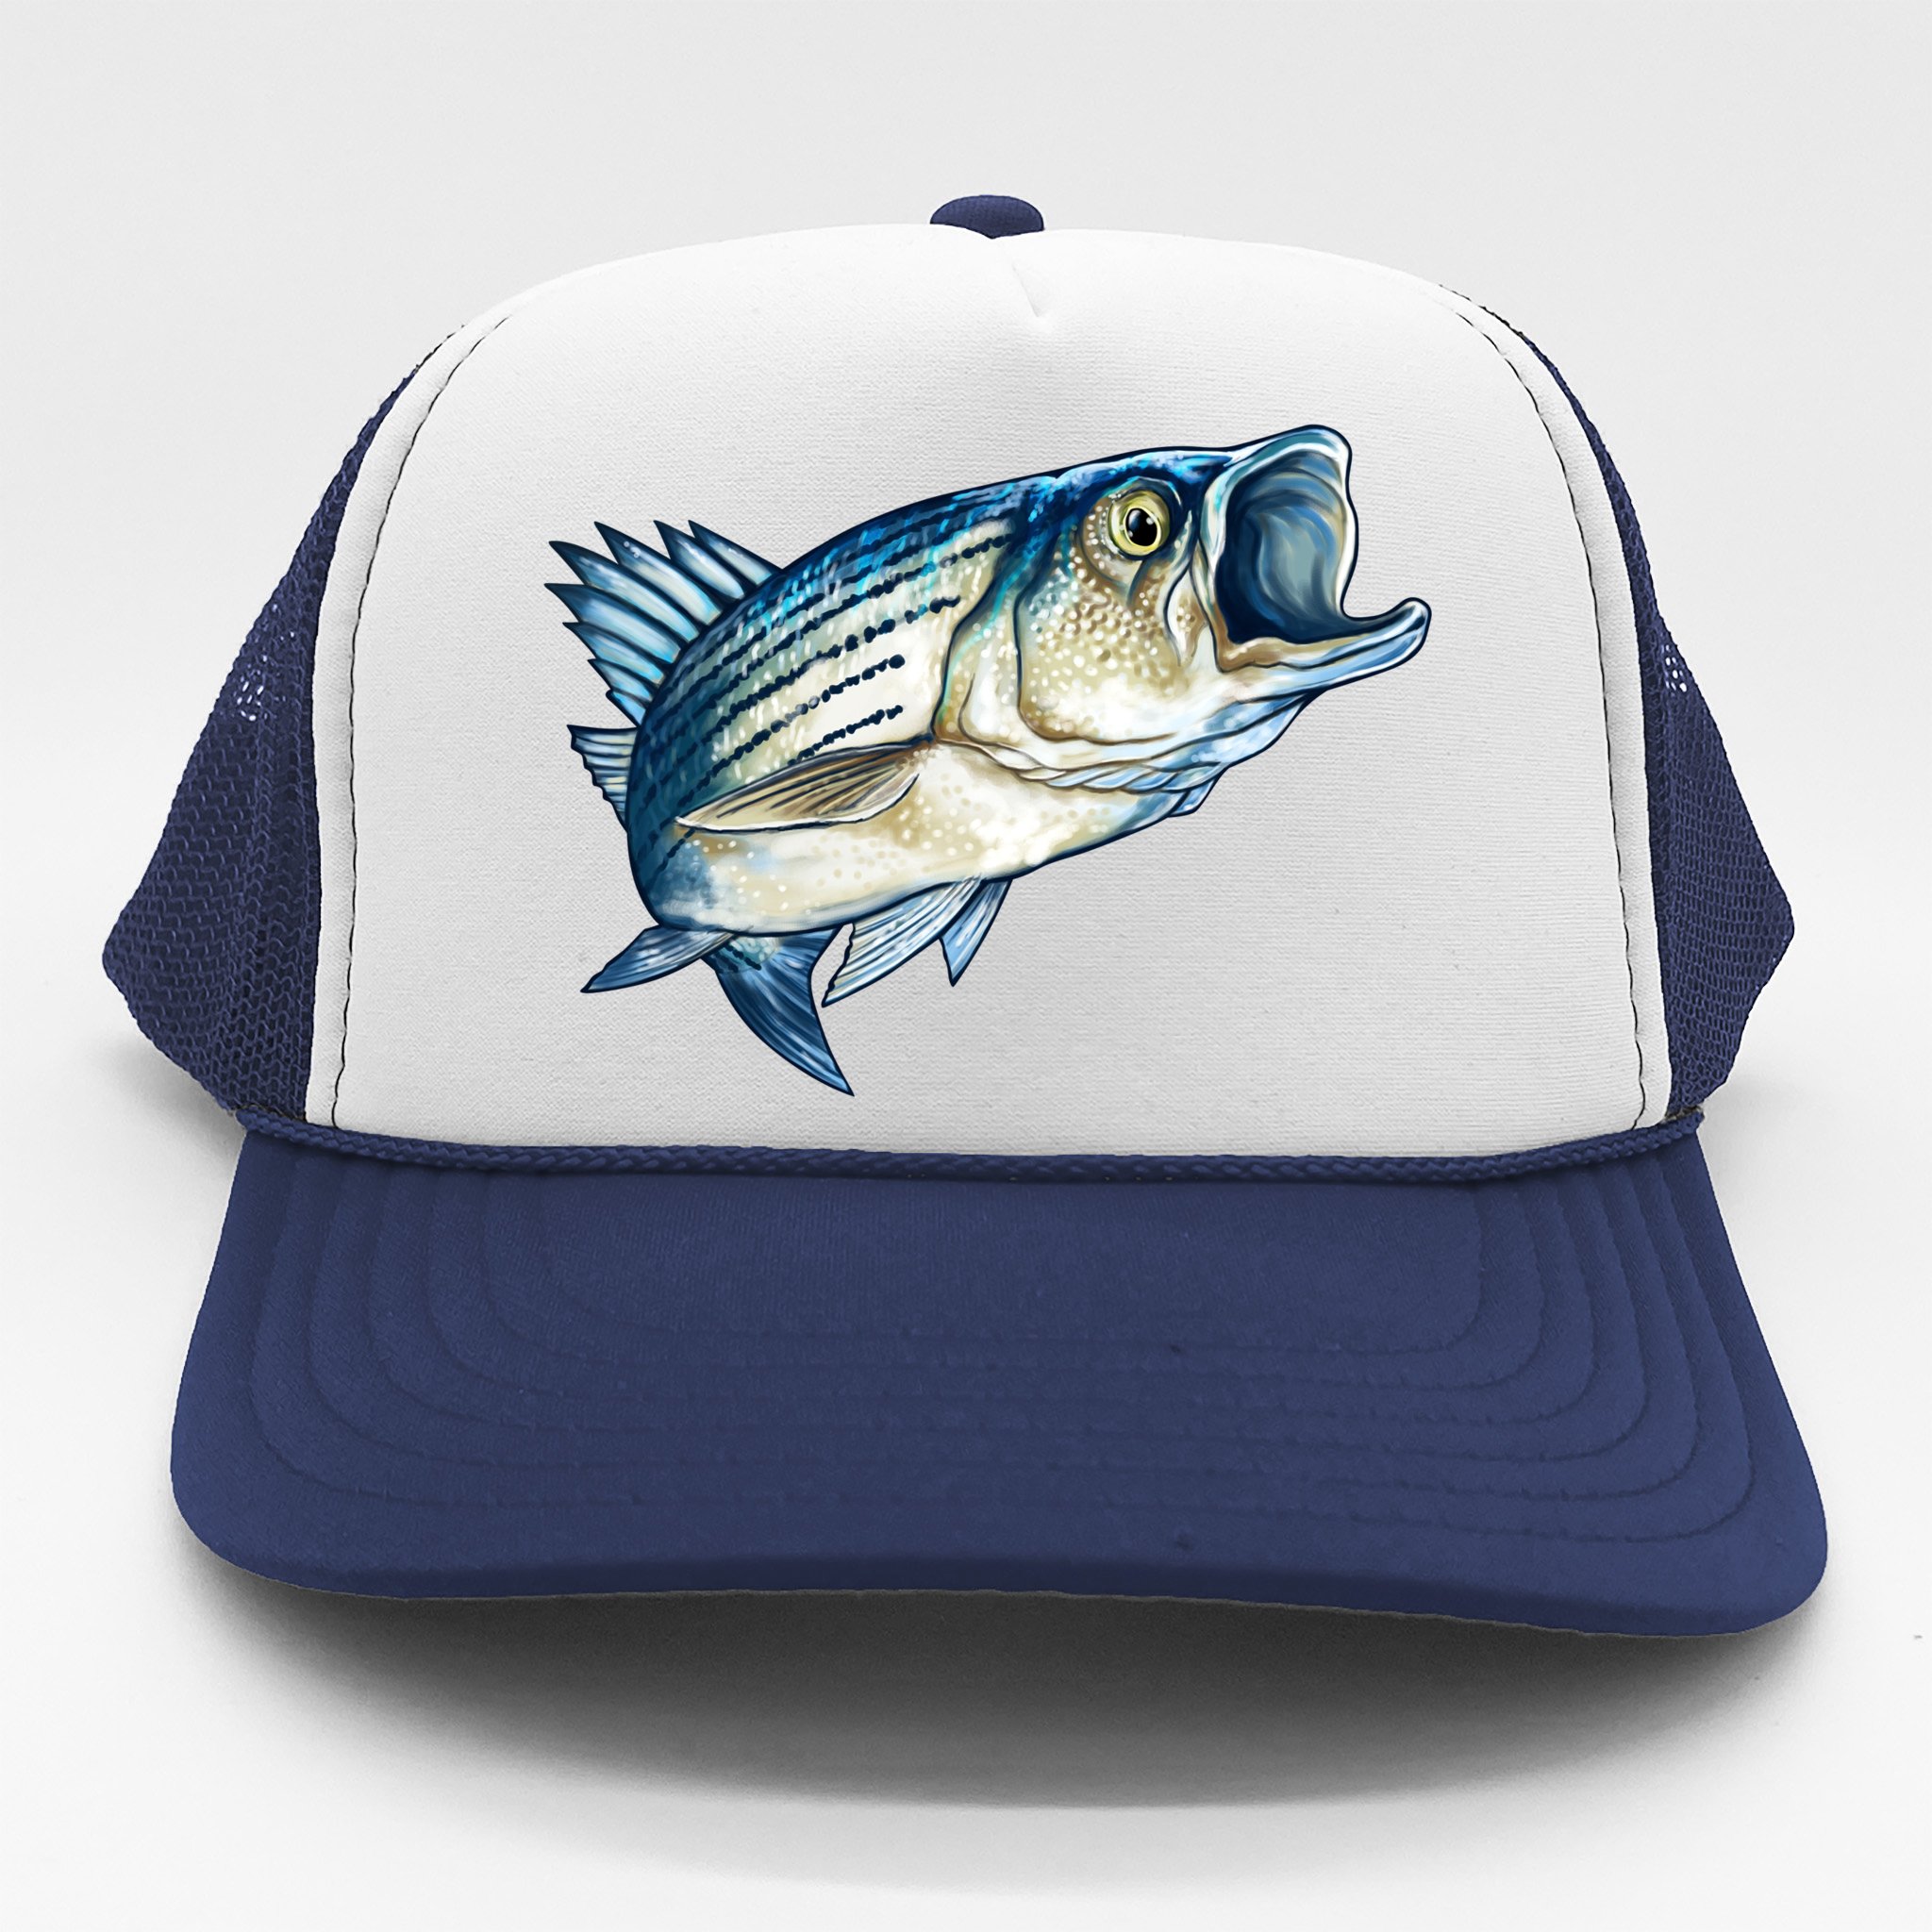 https://images3.teeshirtpalace.com/images/productImages/wildlife---striped-bass--navy-th-garment.jpg